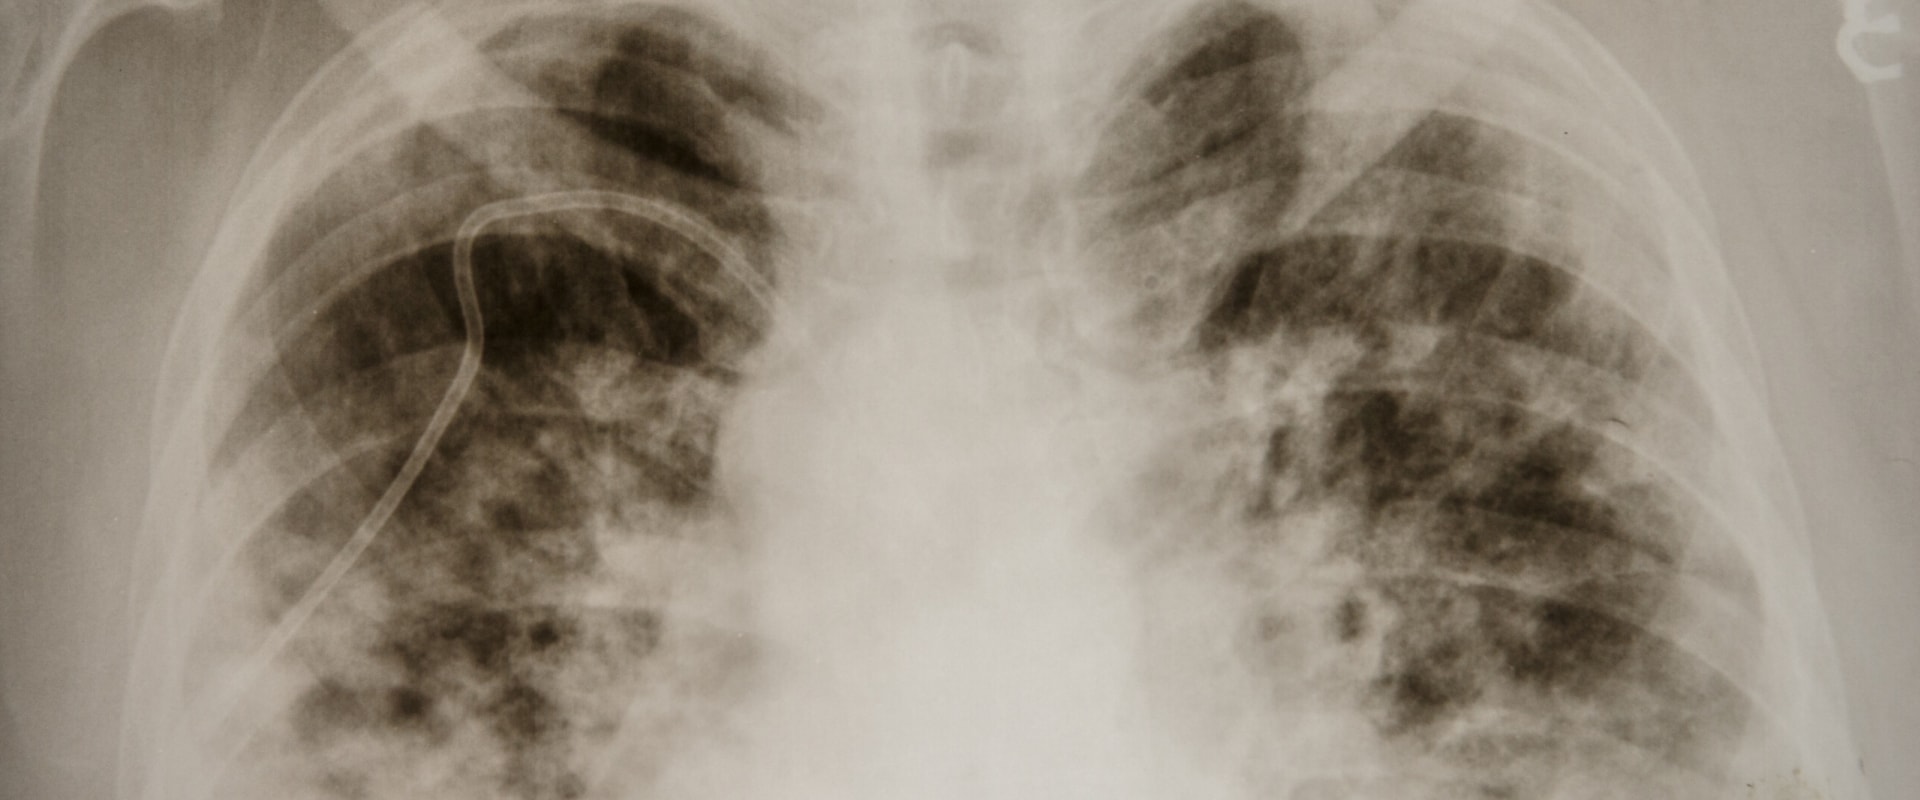 The Risks of Delta 8 on Lung Health